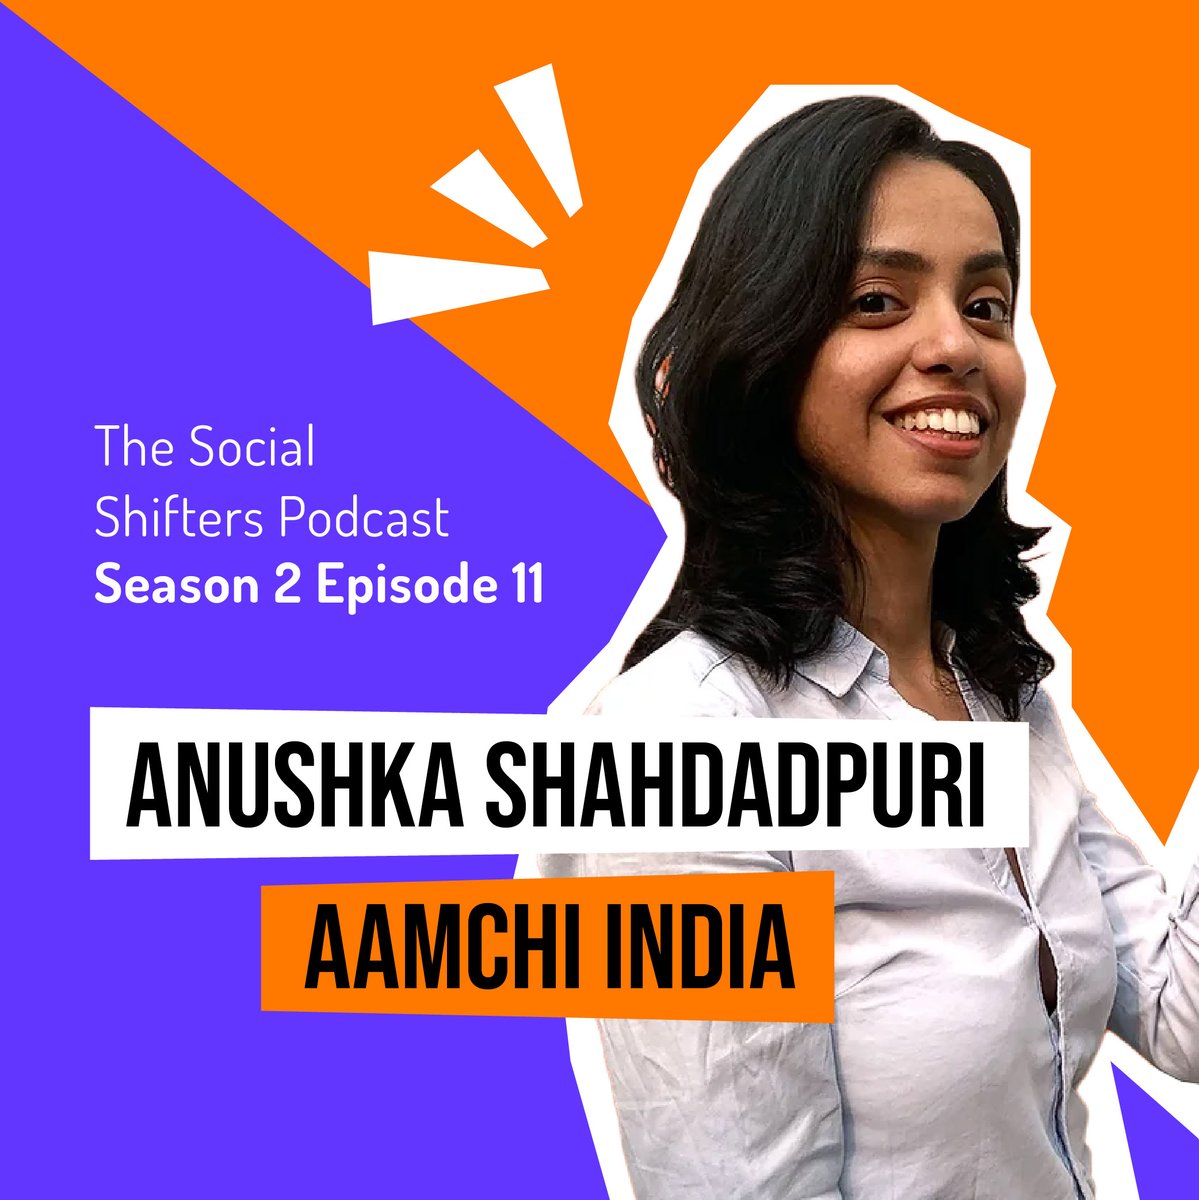 Anushka's journey is awe-inspiring! Her project Aamchi is transforming communities. From the Cindy refugee colony to winning the 2023 Global Innovation Challenge, her impact is undeniable. Watch the full episode: youtu.be/yAzSB9PWDjY